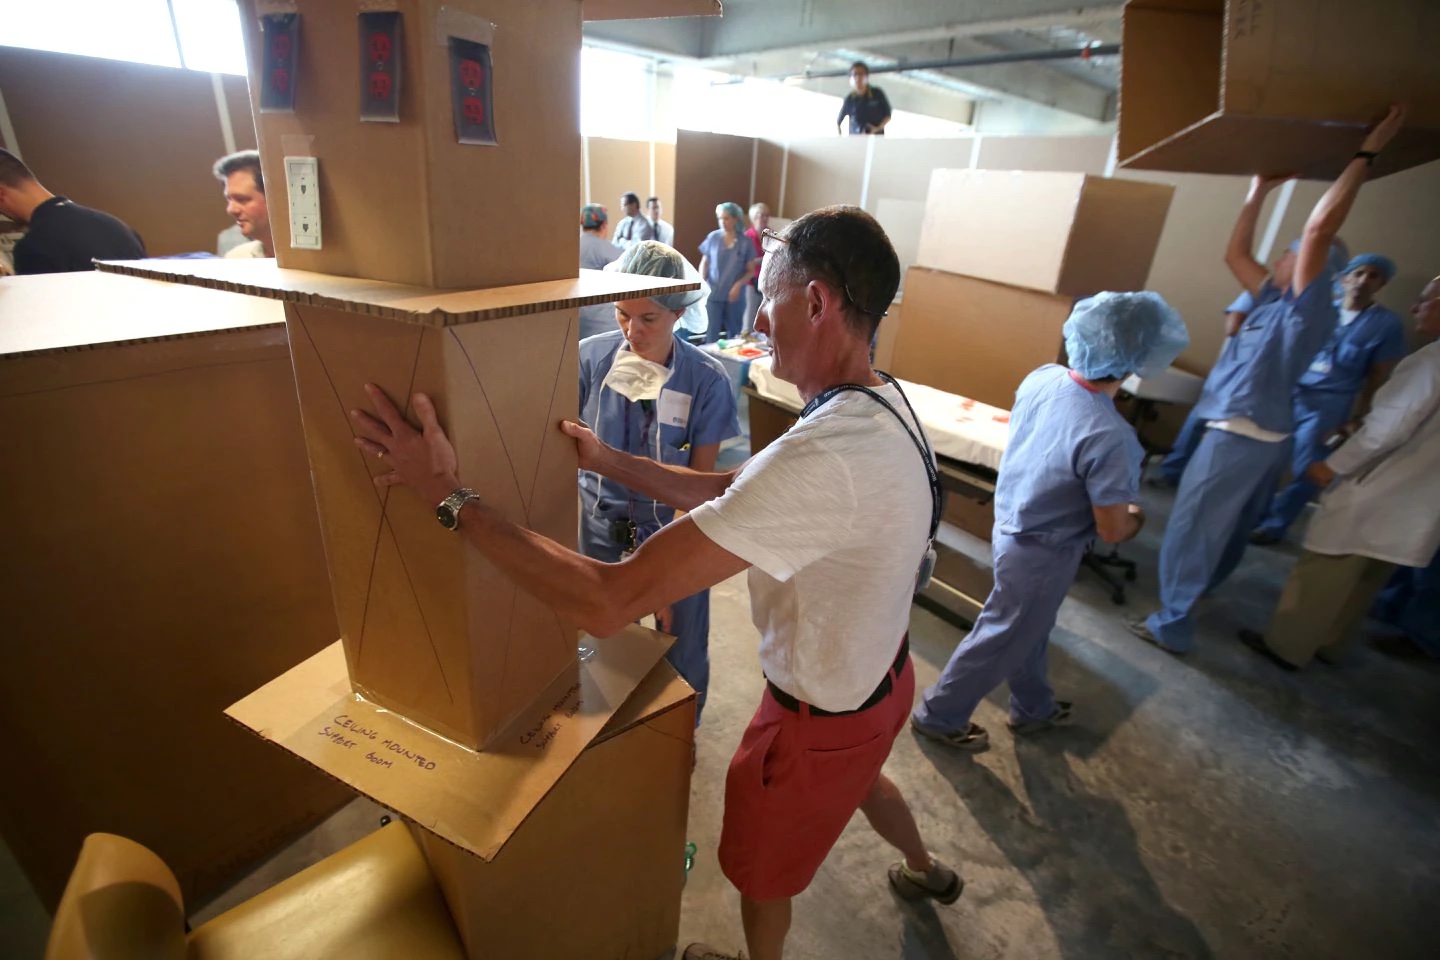 Doctors in blue scrubs and a man in red shorts and a white shirt all move cardboard boxes around in a room as they use them to build a building.